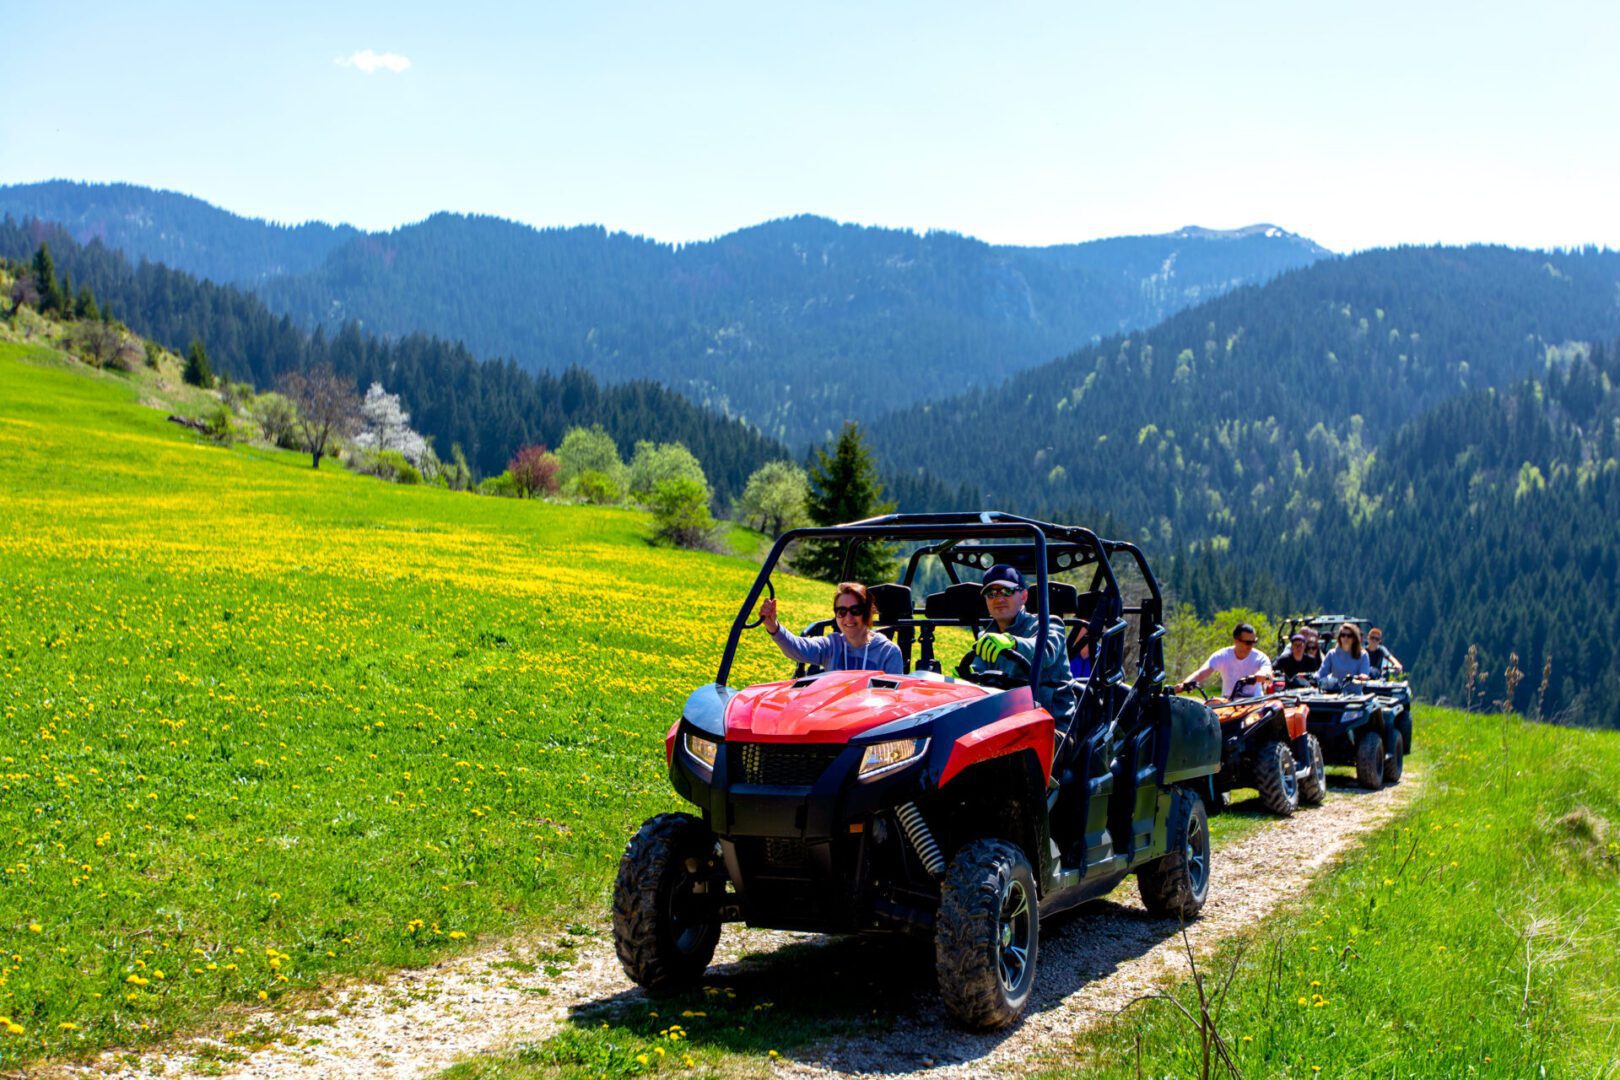 A group of people riding on the back of an atv.